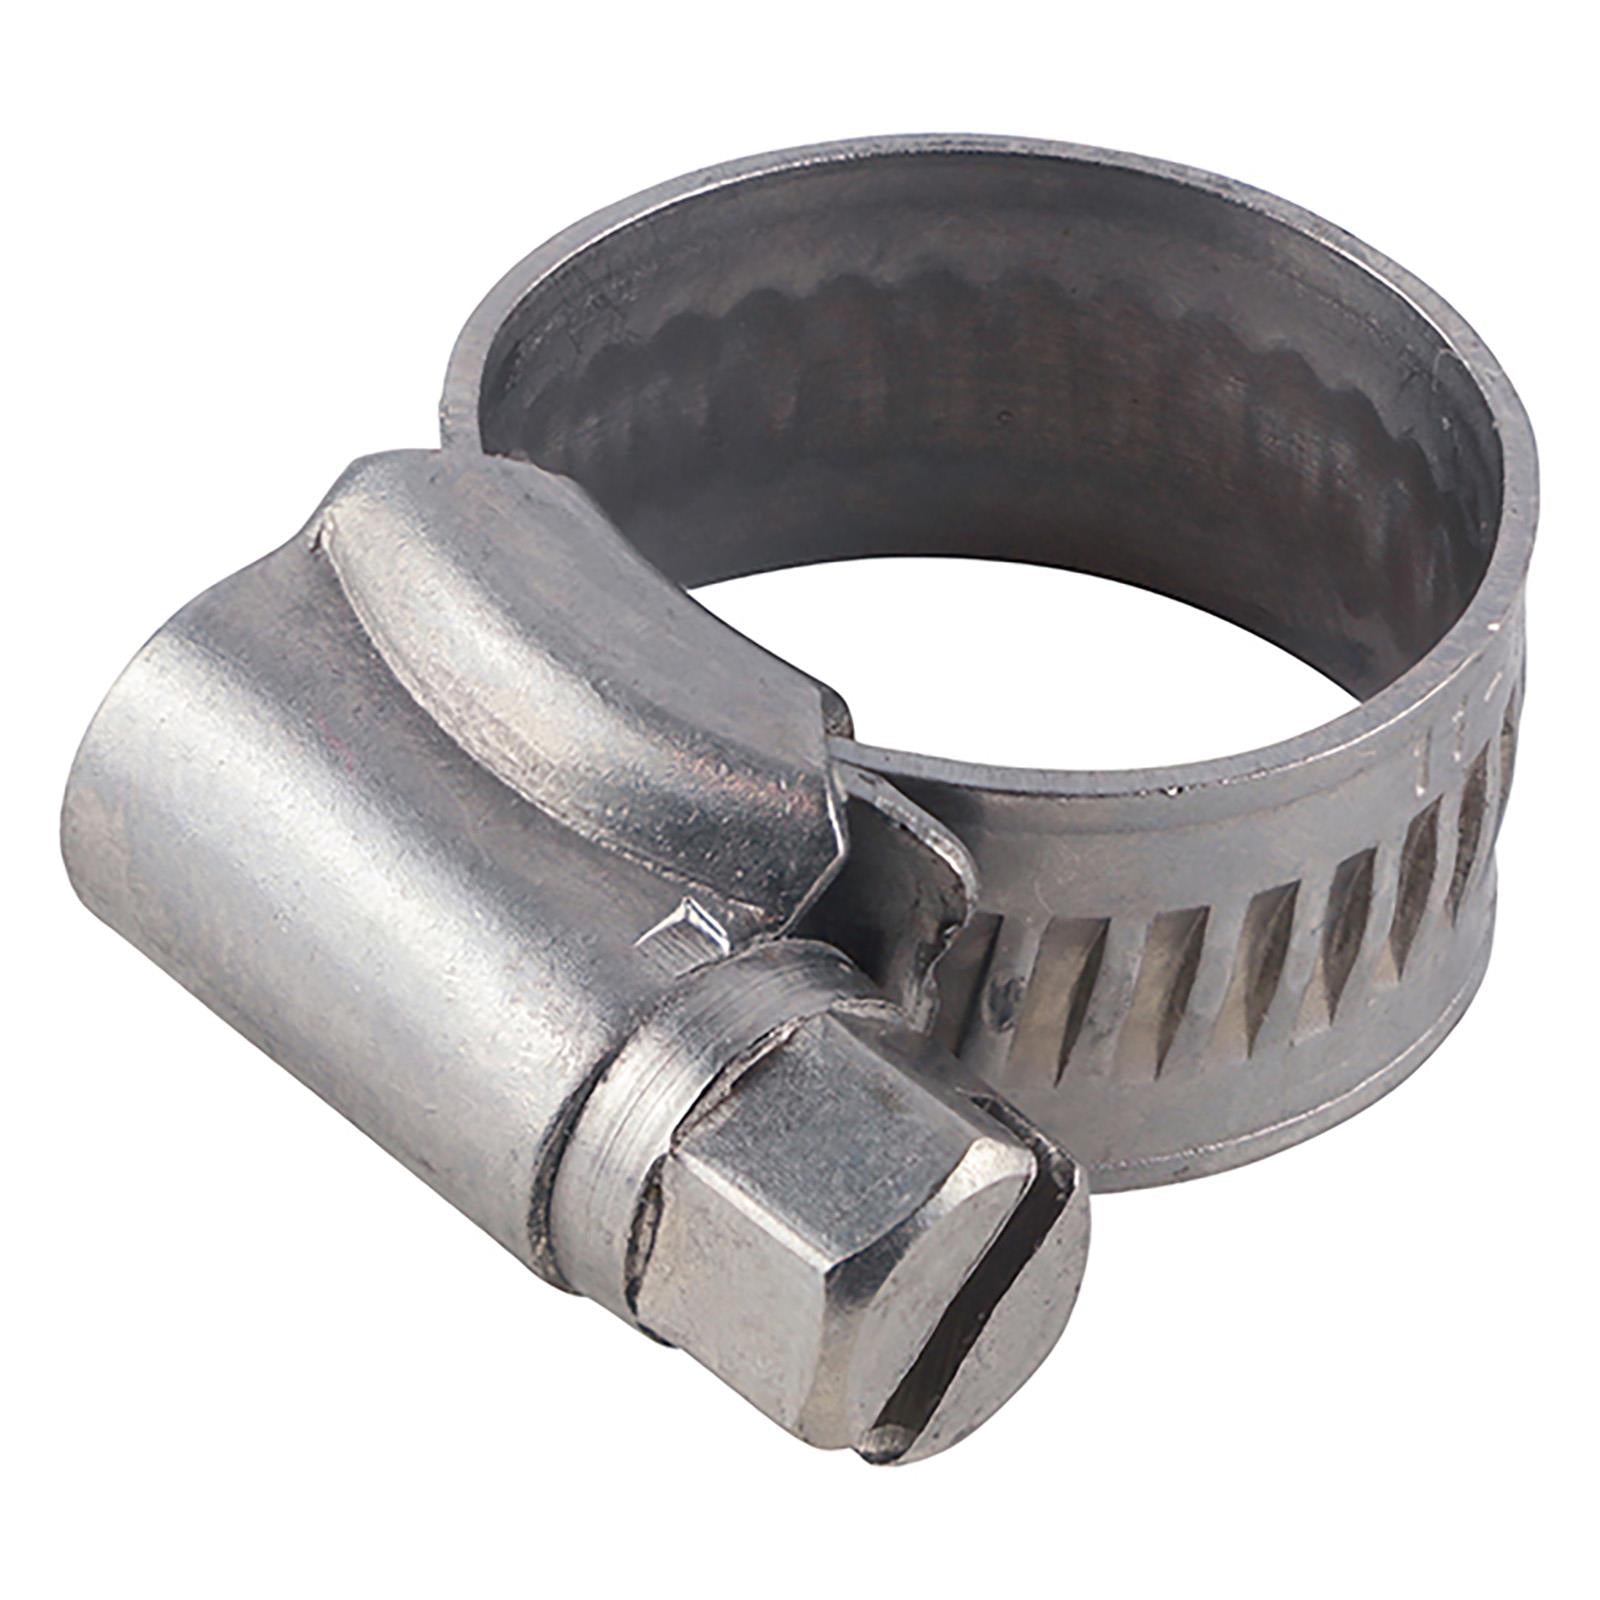 TIMCO Hose Clips Clamps Zinc or Stainless Steel - Choose Size